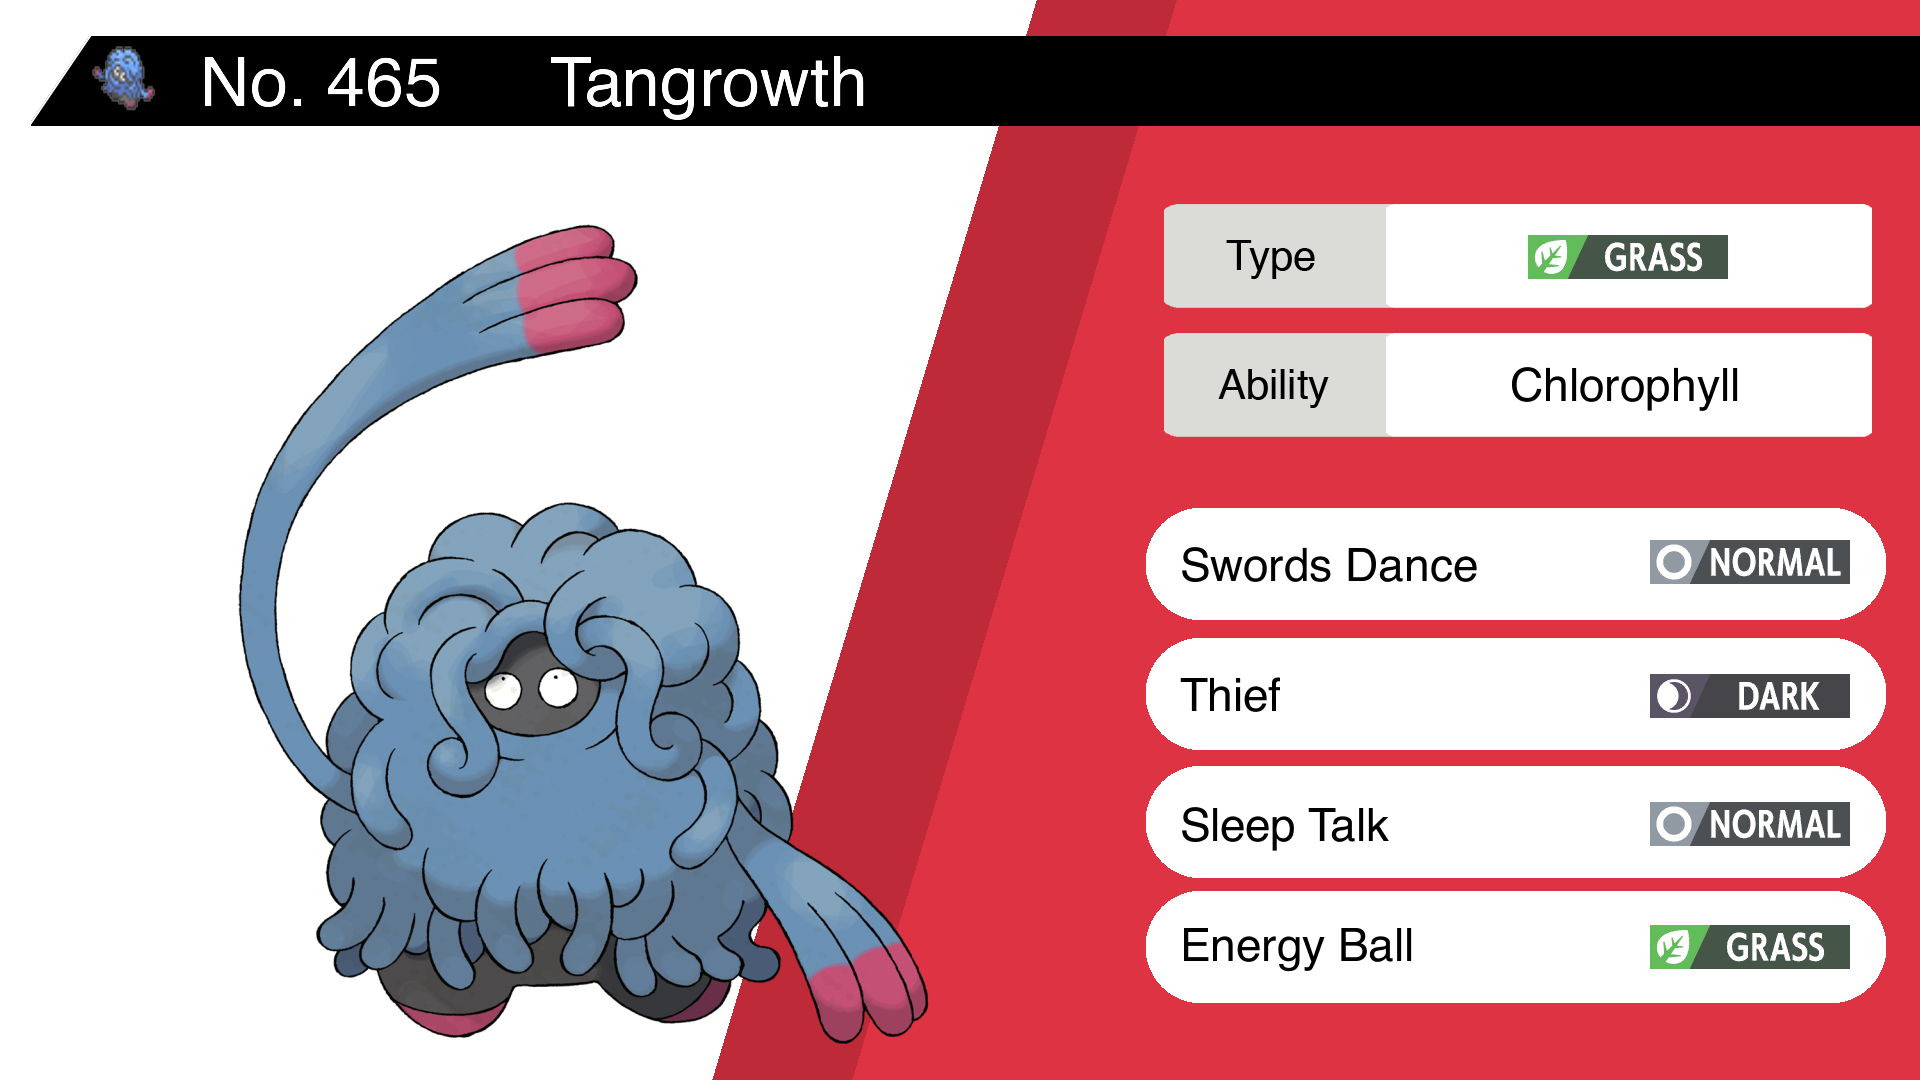 Tangrowth Hd Wallpapers